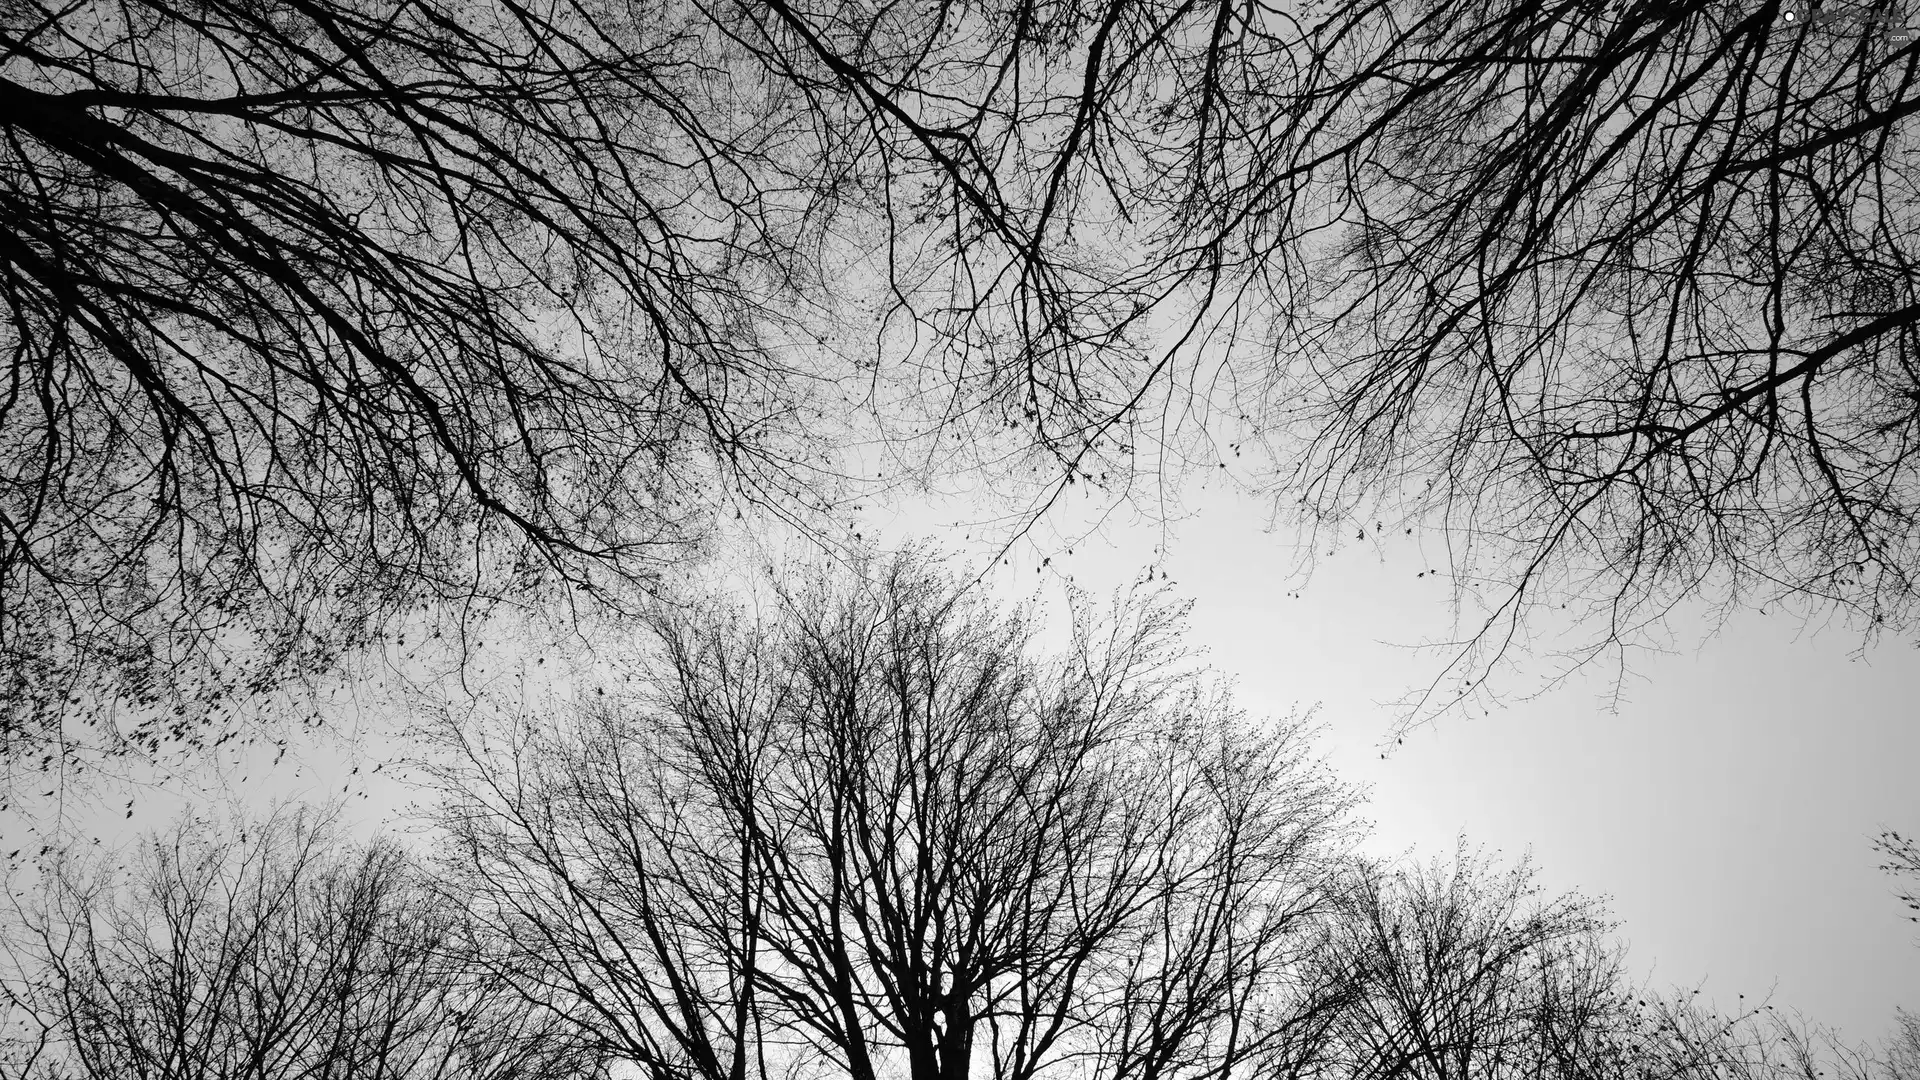 Sky, Black and white, viewes, branch pics, trees